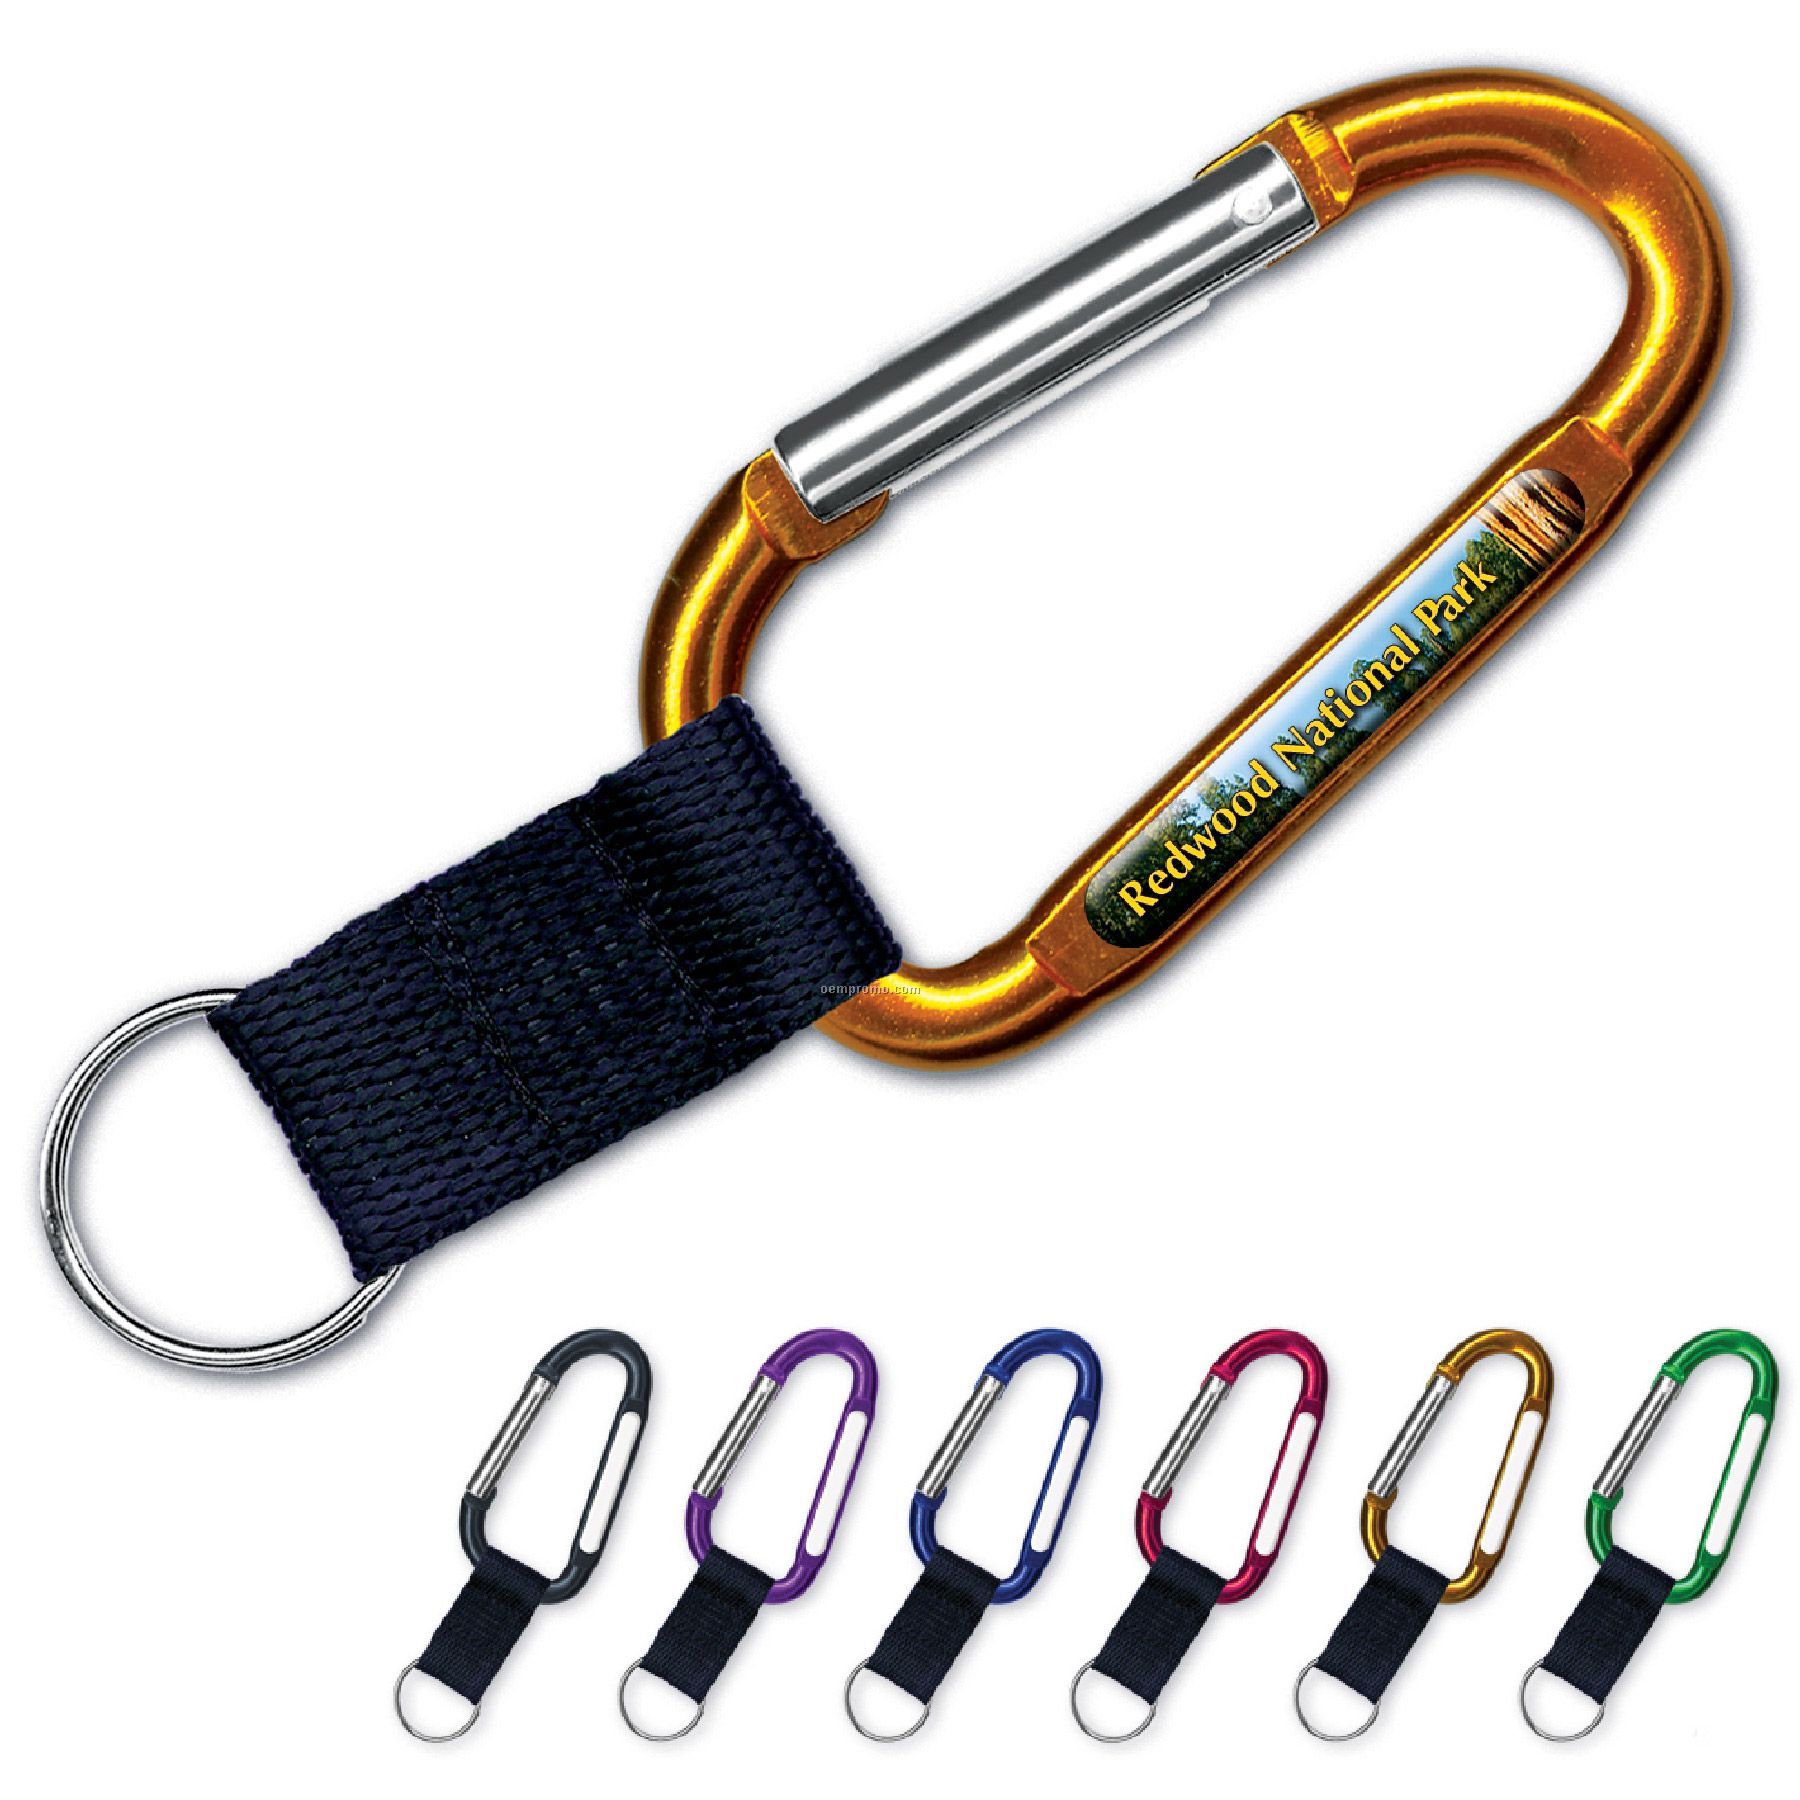 8cm Carabiner With Lanyard And Vibracolor Dome